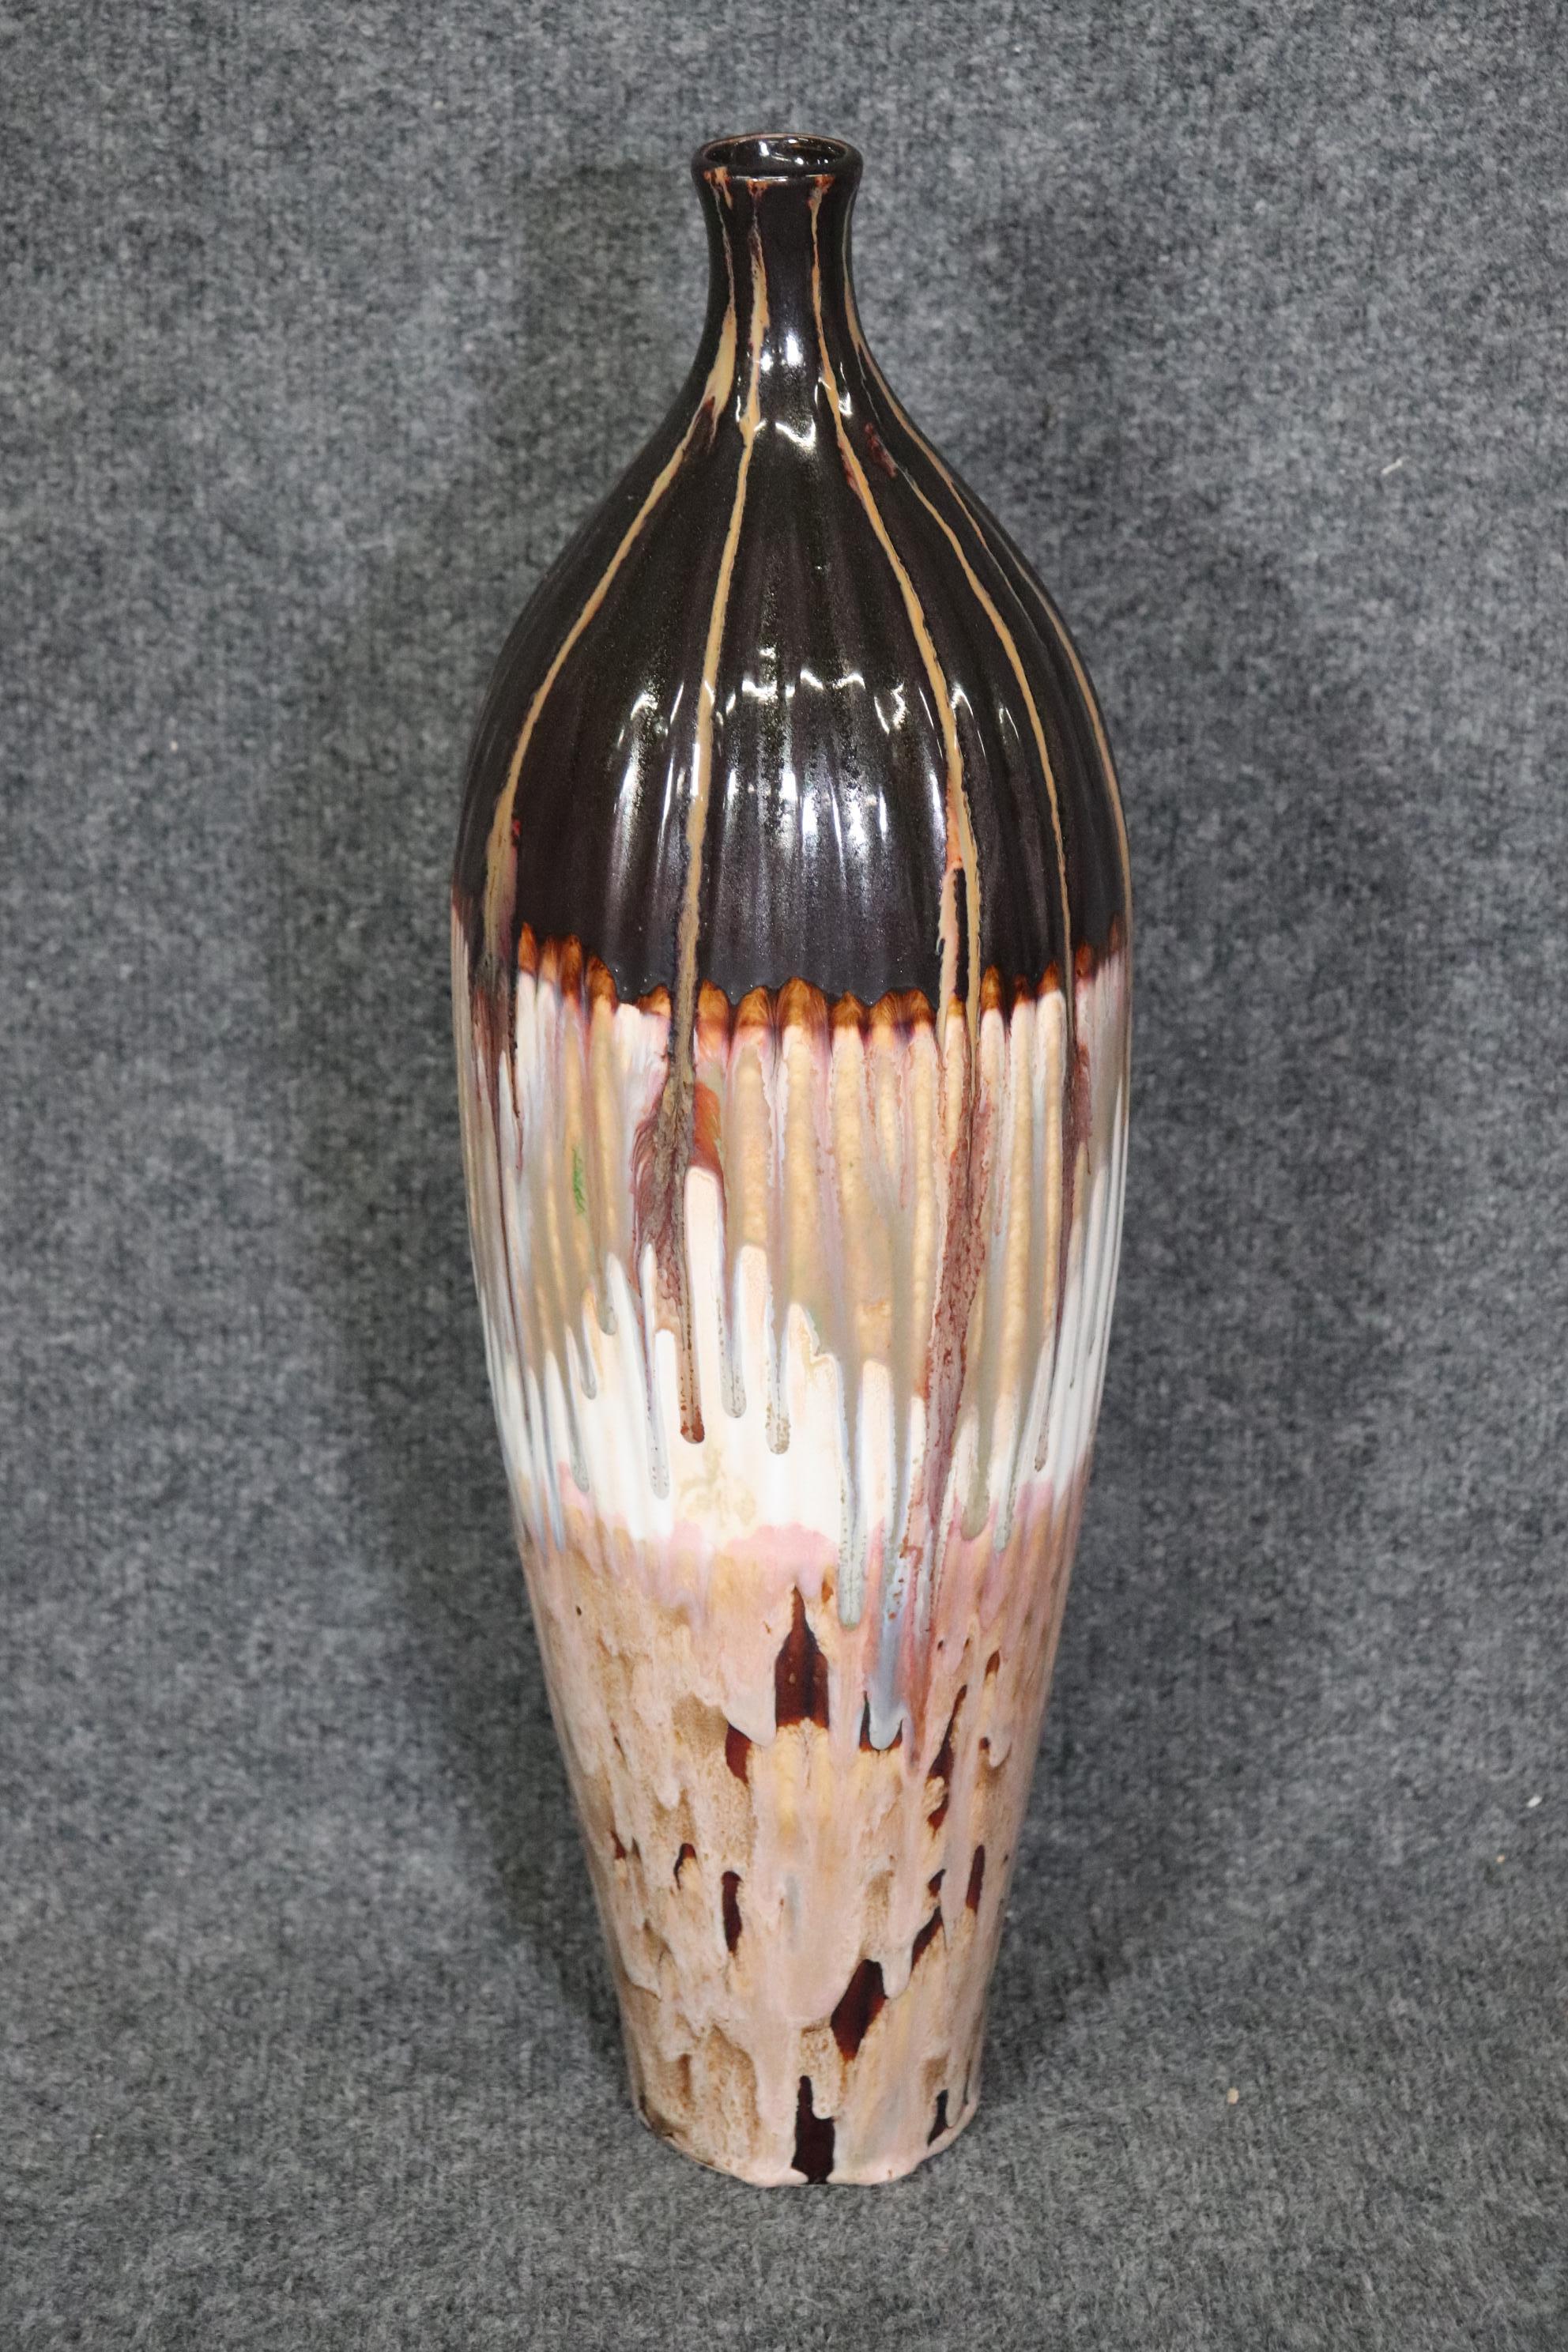 Dimensions: Height: 20 in Width: 6 1/4 in Depth: 6 1/4 in 

This Vintage Mid Century Modern pottery art vase is made of the highest quality. If you look at the photos provided, you will see the flowing design in mid century colors. This vase will